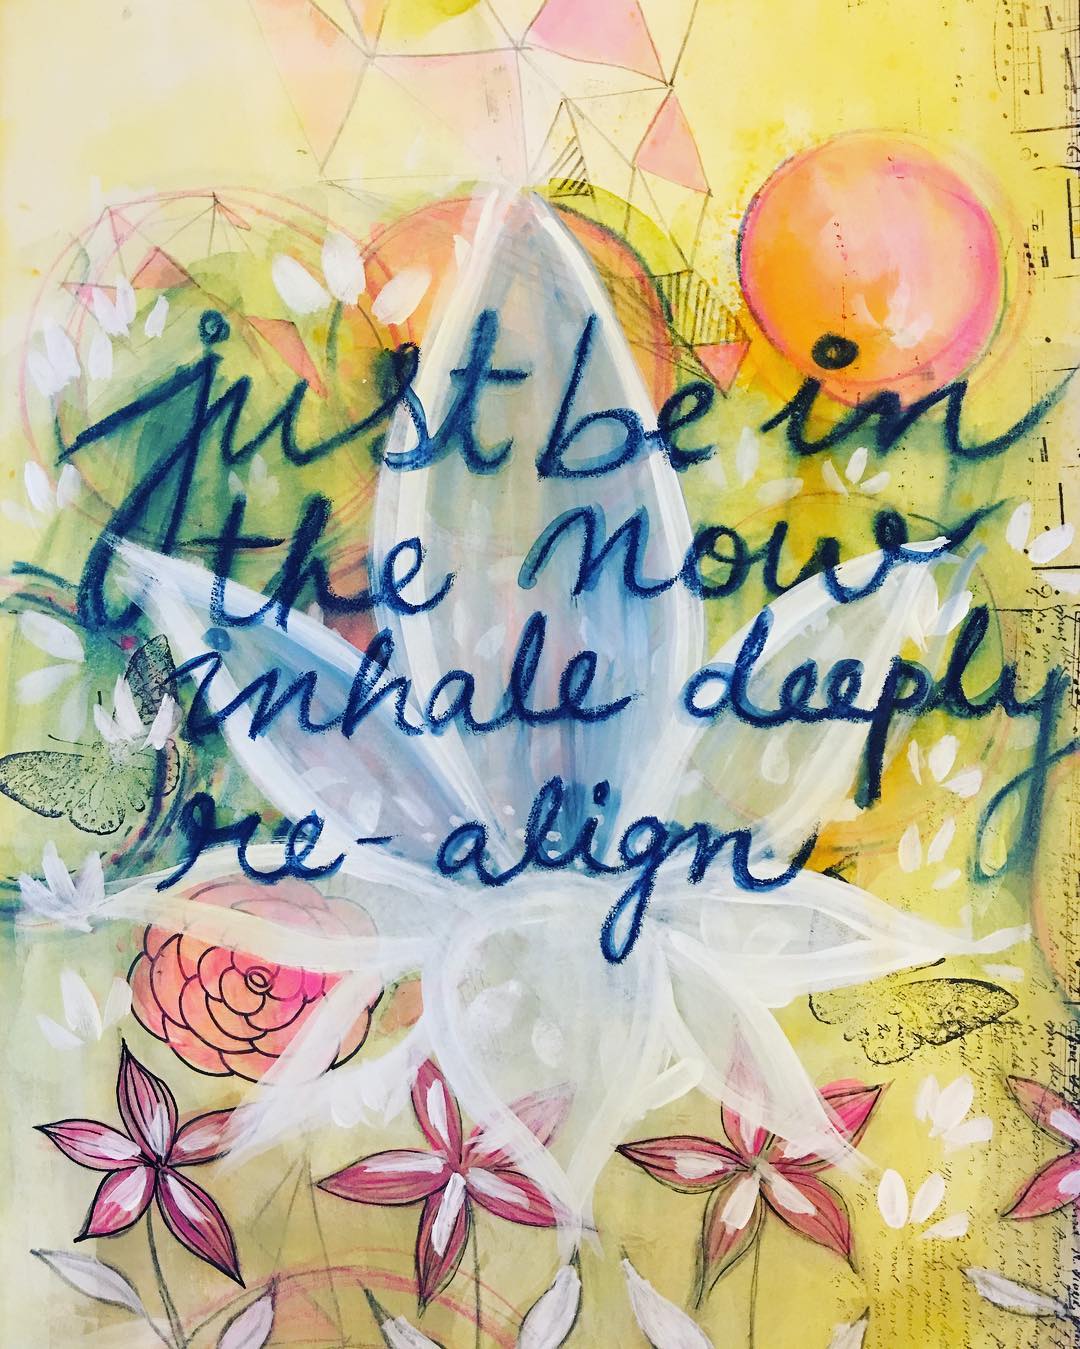 Daily Art Journaling ~ Day 70
Re-align